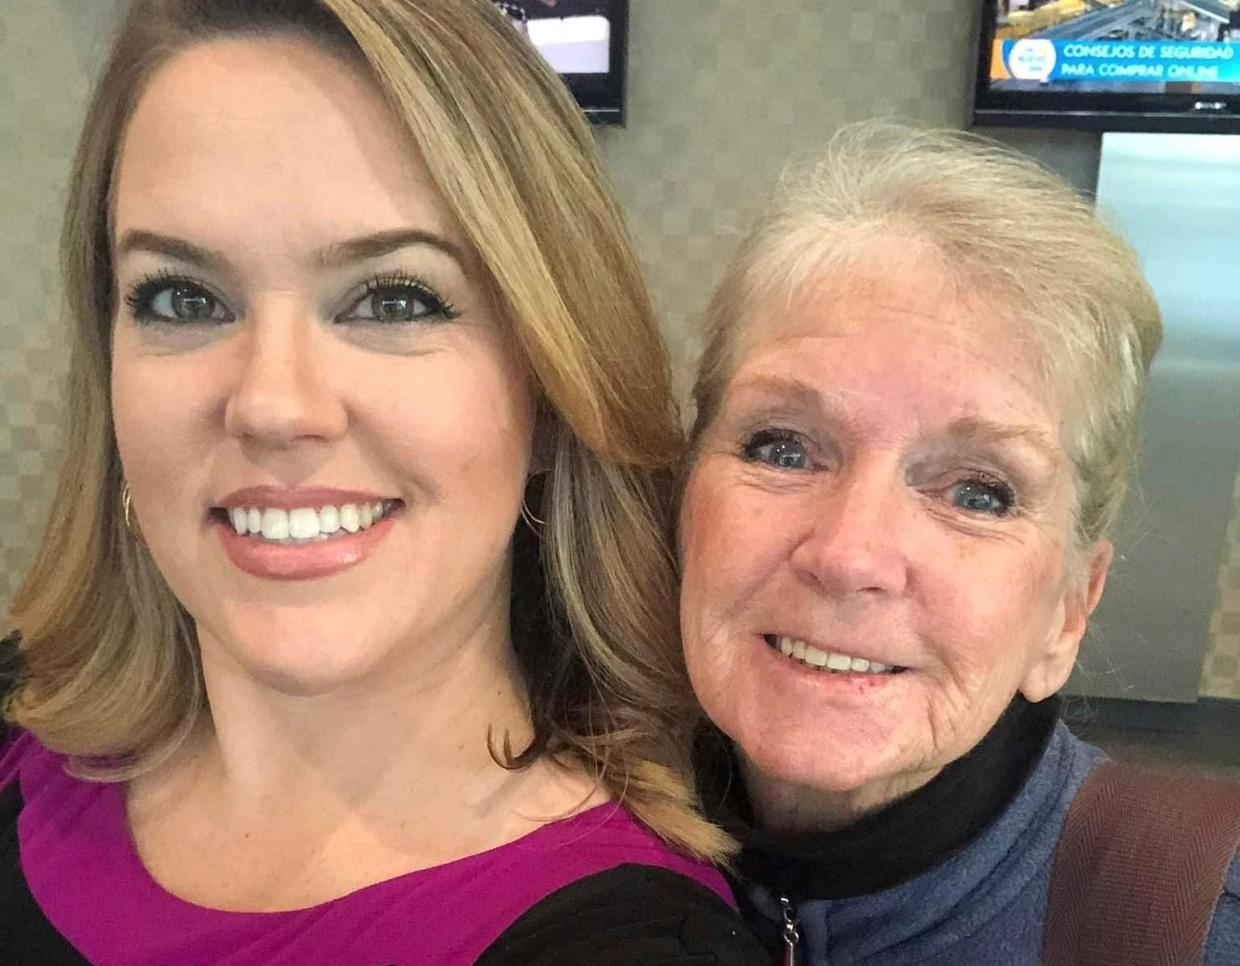 Emmy-award winning NBC news anchor in Connecticut reveals her mother Claudia M. Voight was murdered.